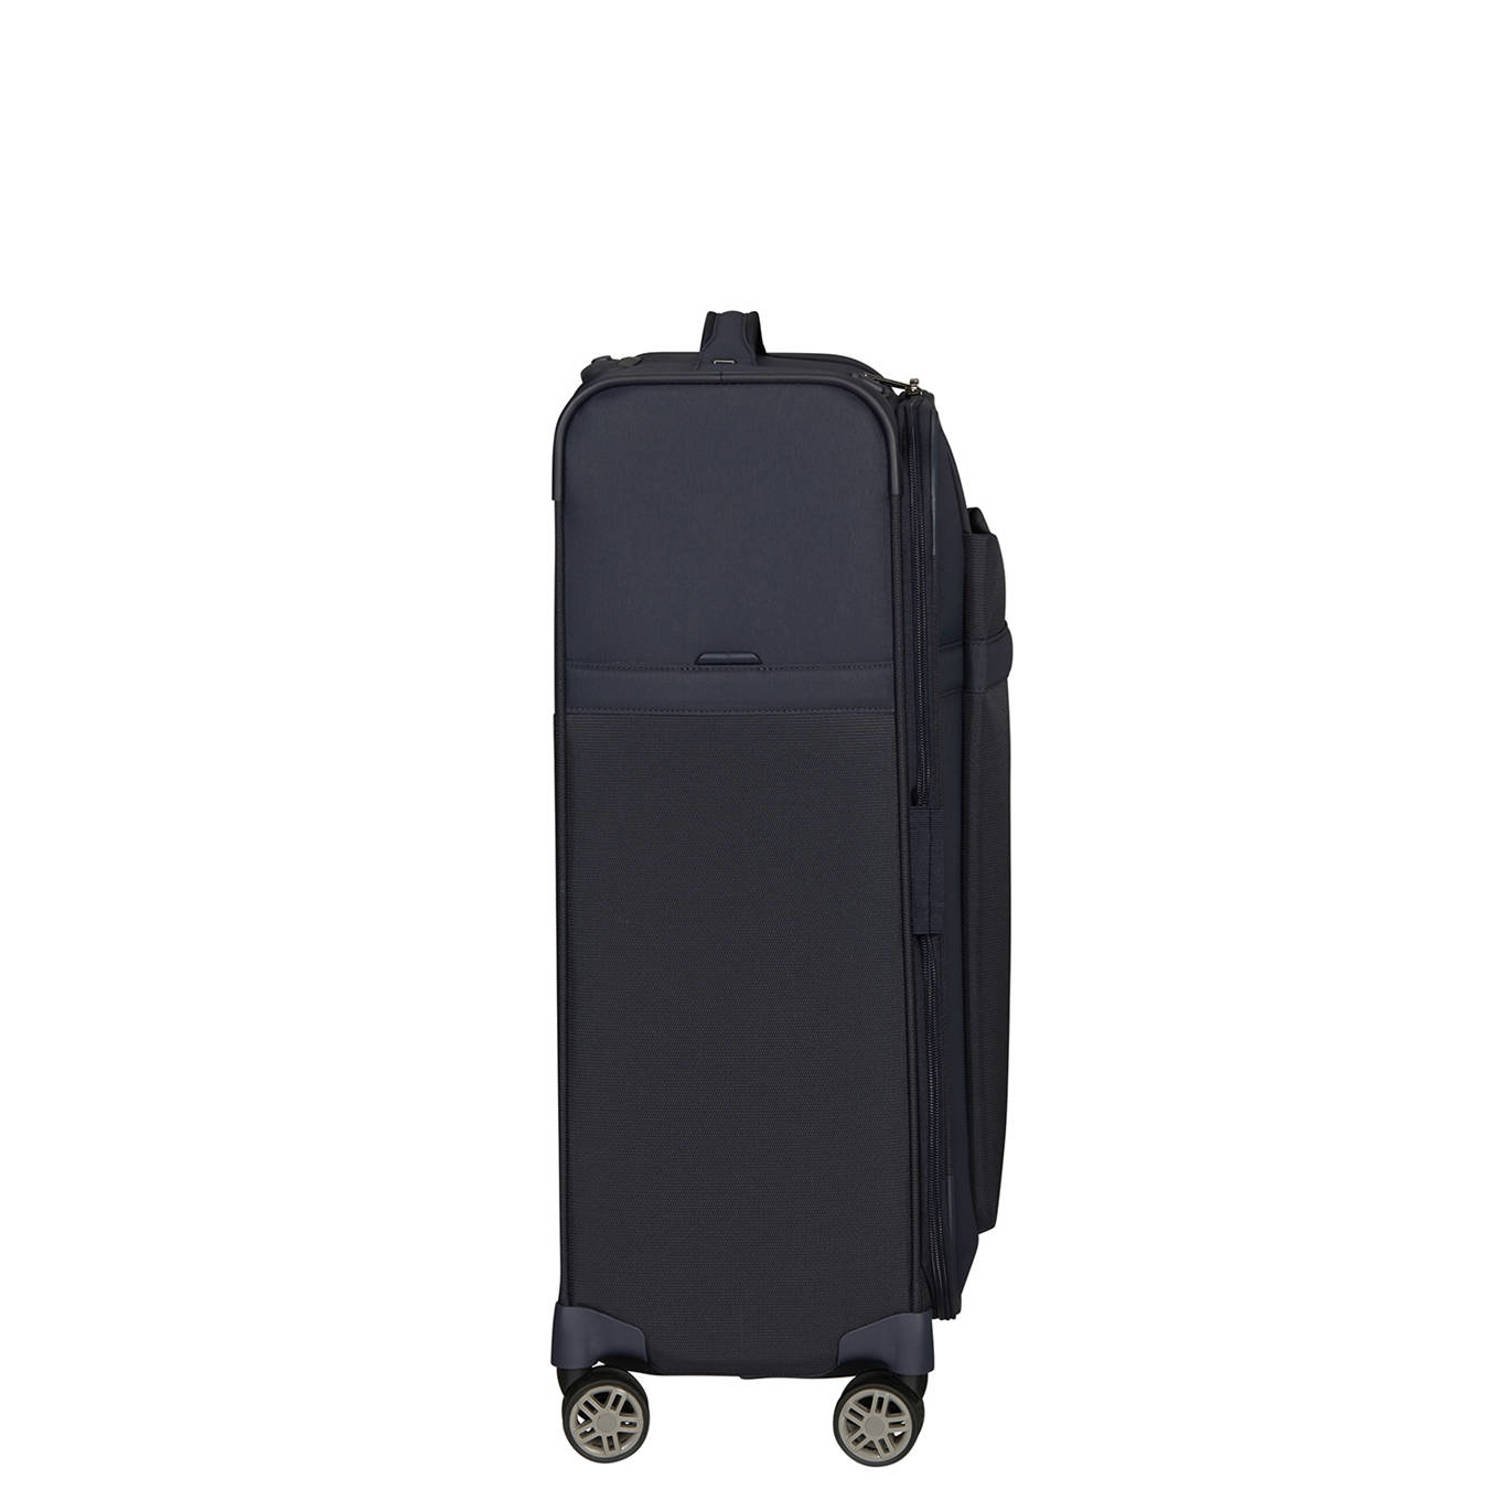 Samsonite trolley Airea 67 cm. Expandable donkerblauw